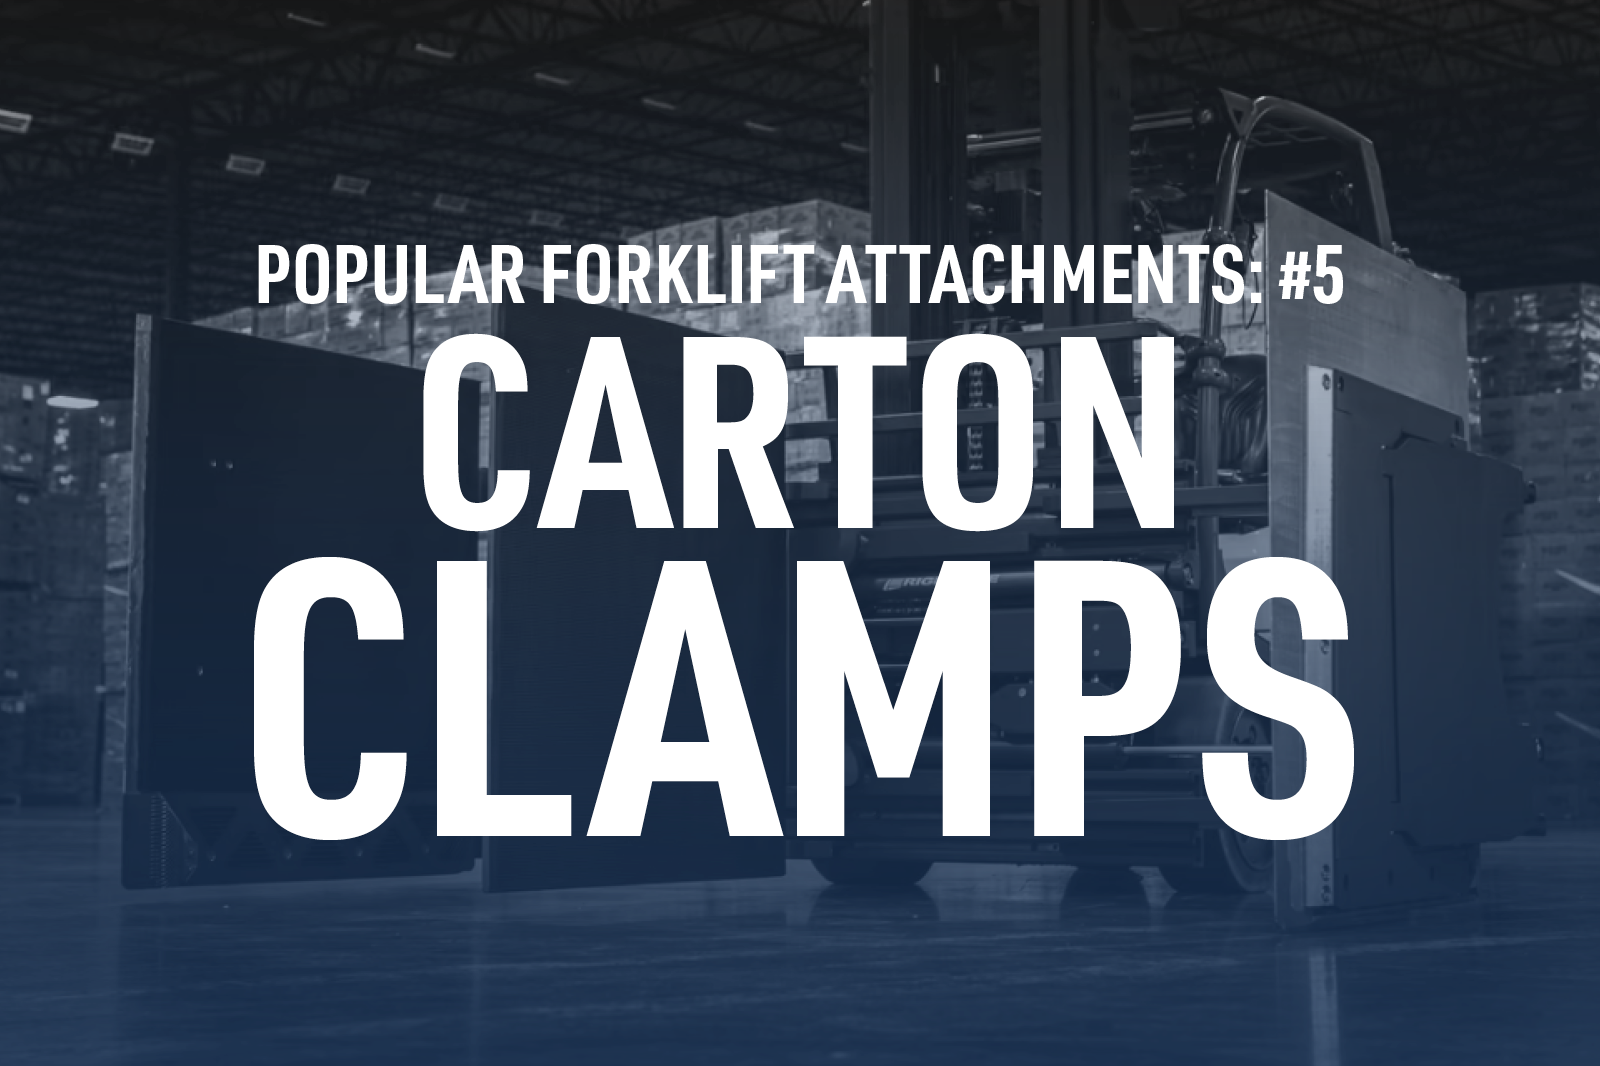 Popular Forklift Attachments: #5 Carton Clamps